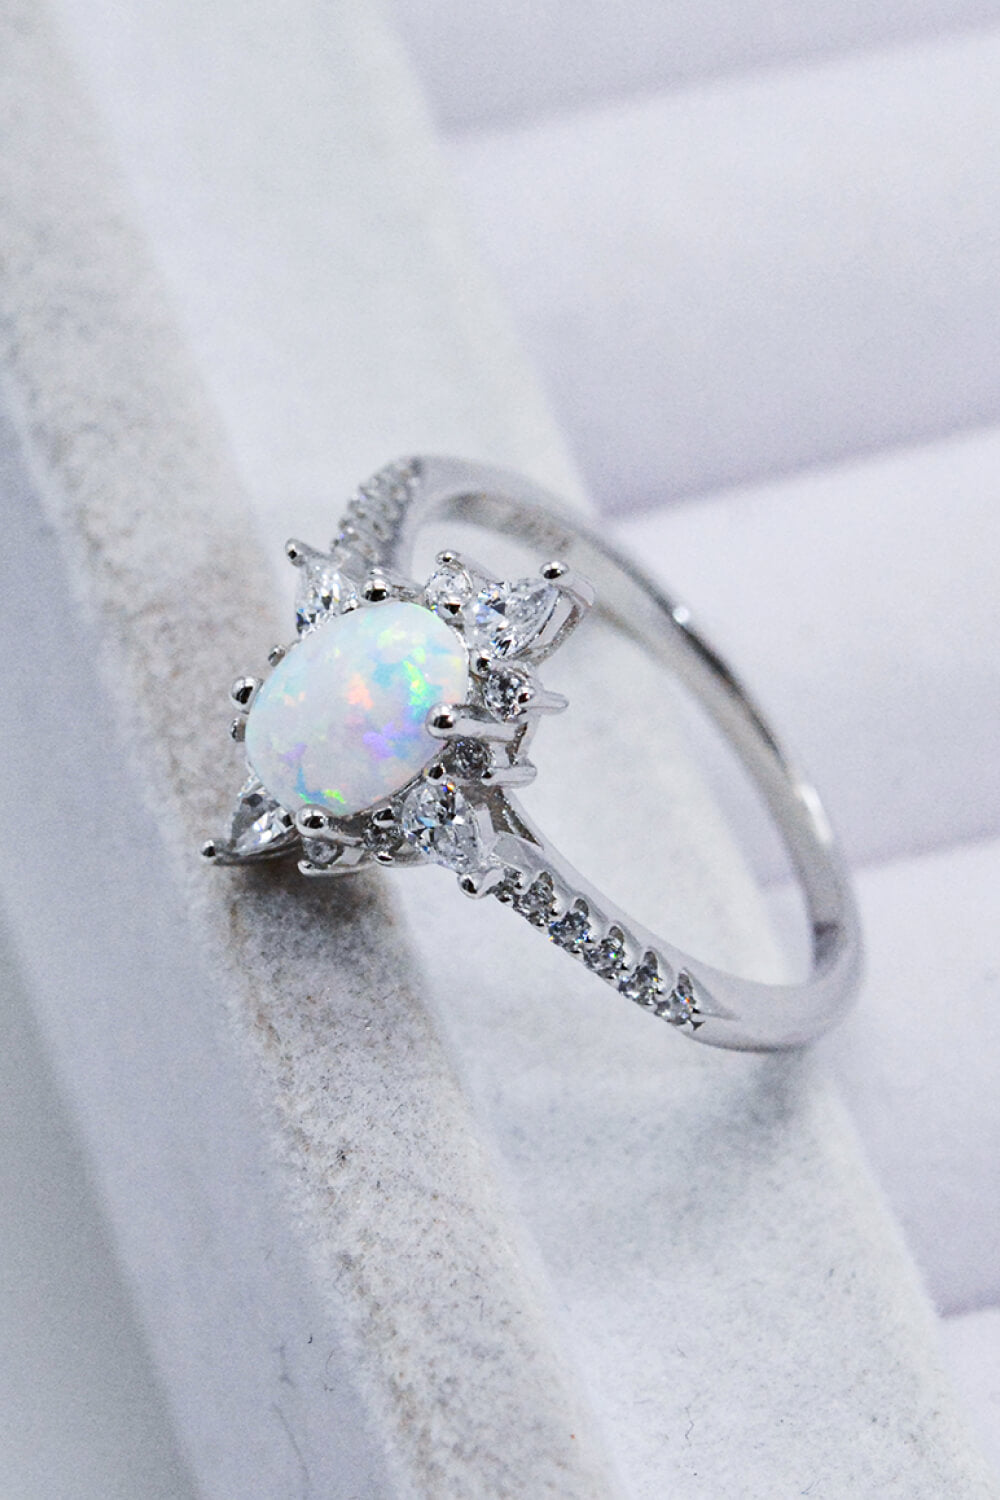 Women’s Platinum-Plated Opal and Zircon Ring